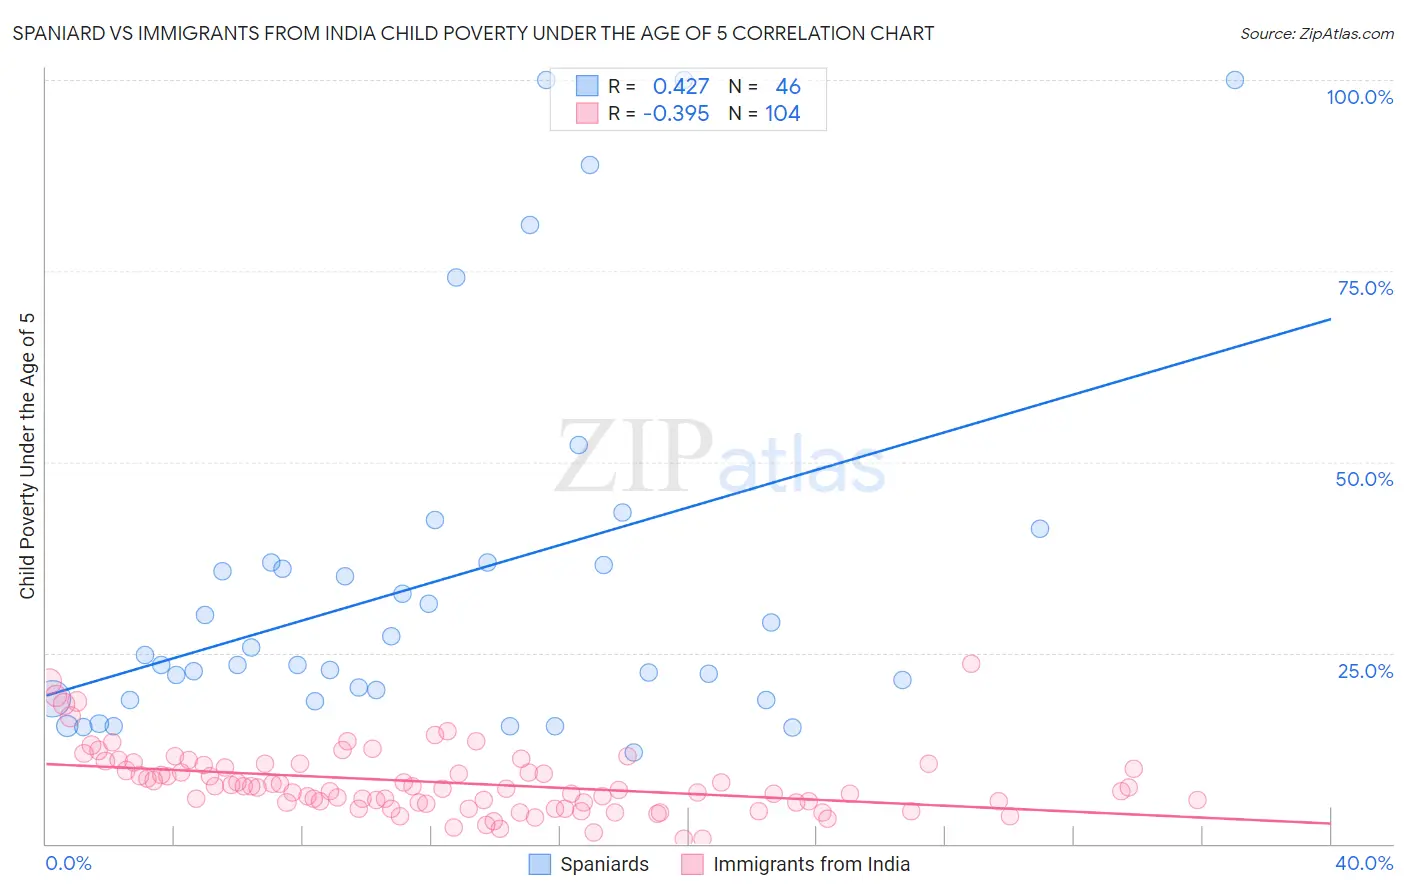 Spaniard vs Immigrants from India Child Poverty Under the Age of 5